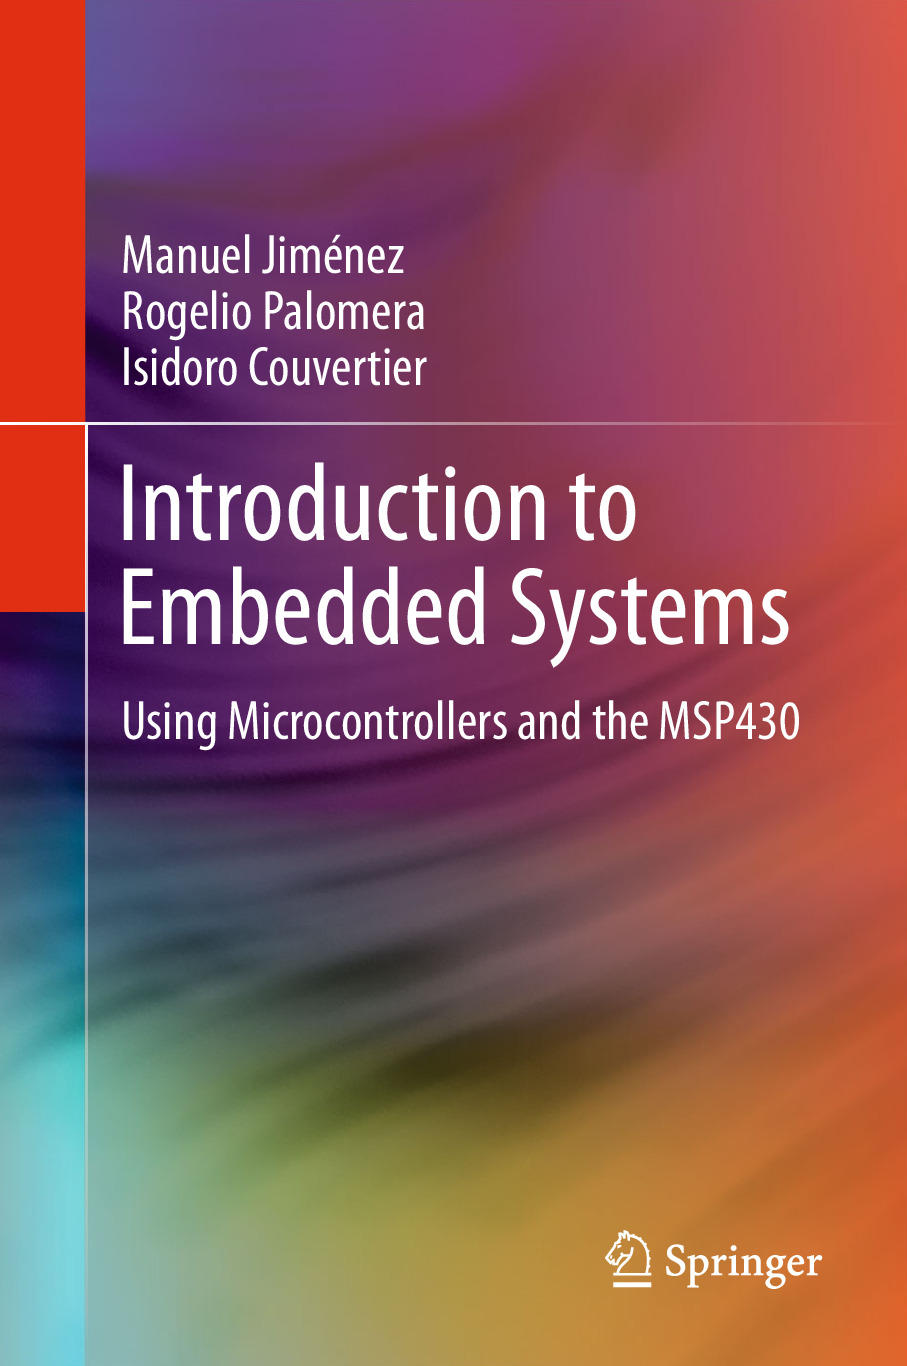 Manuel Jiménez, Rogelio Palomera, Isidoro Couvertier (auth.) – Introduction to Embedded Systems_ Using Microcontrollers and the MSP430-Springer-Verlag New York (2014)